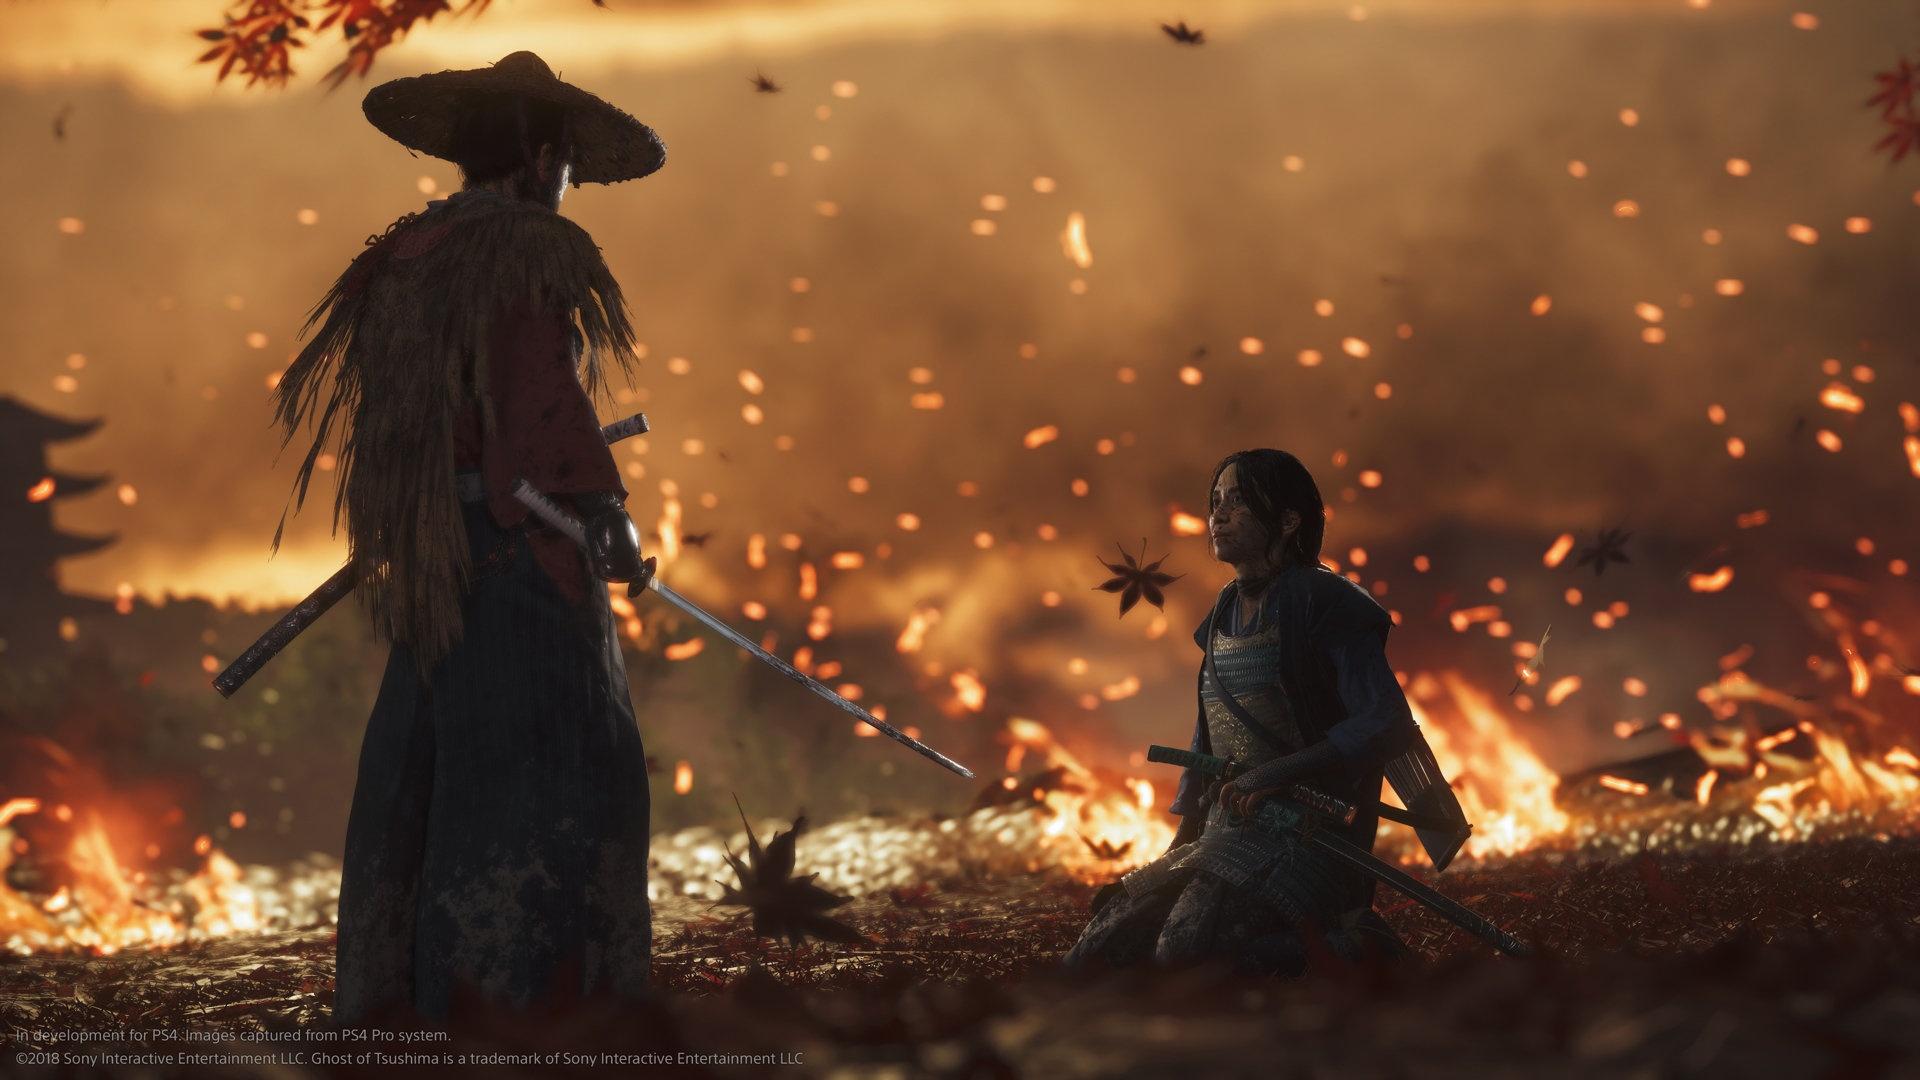 Bringing feudal Japan to life in Ghost of Tsushima